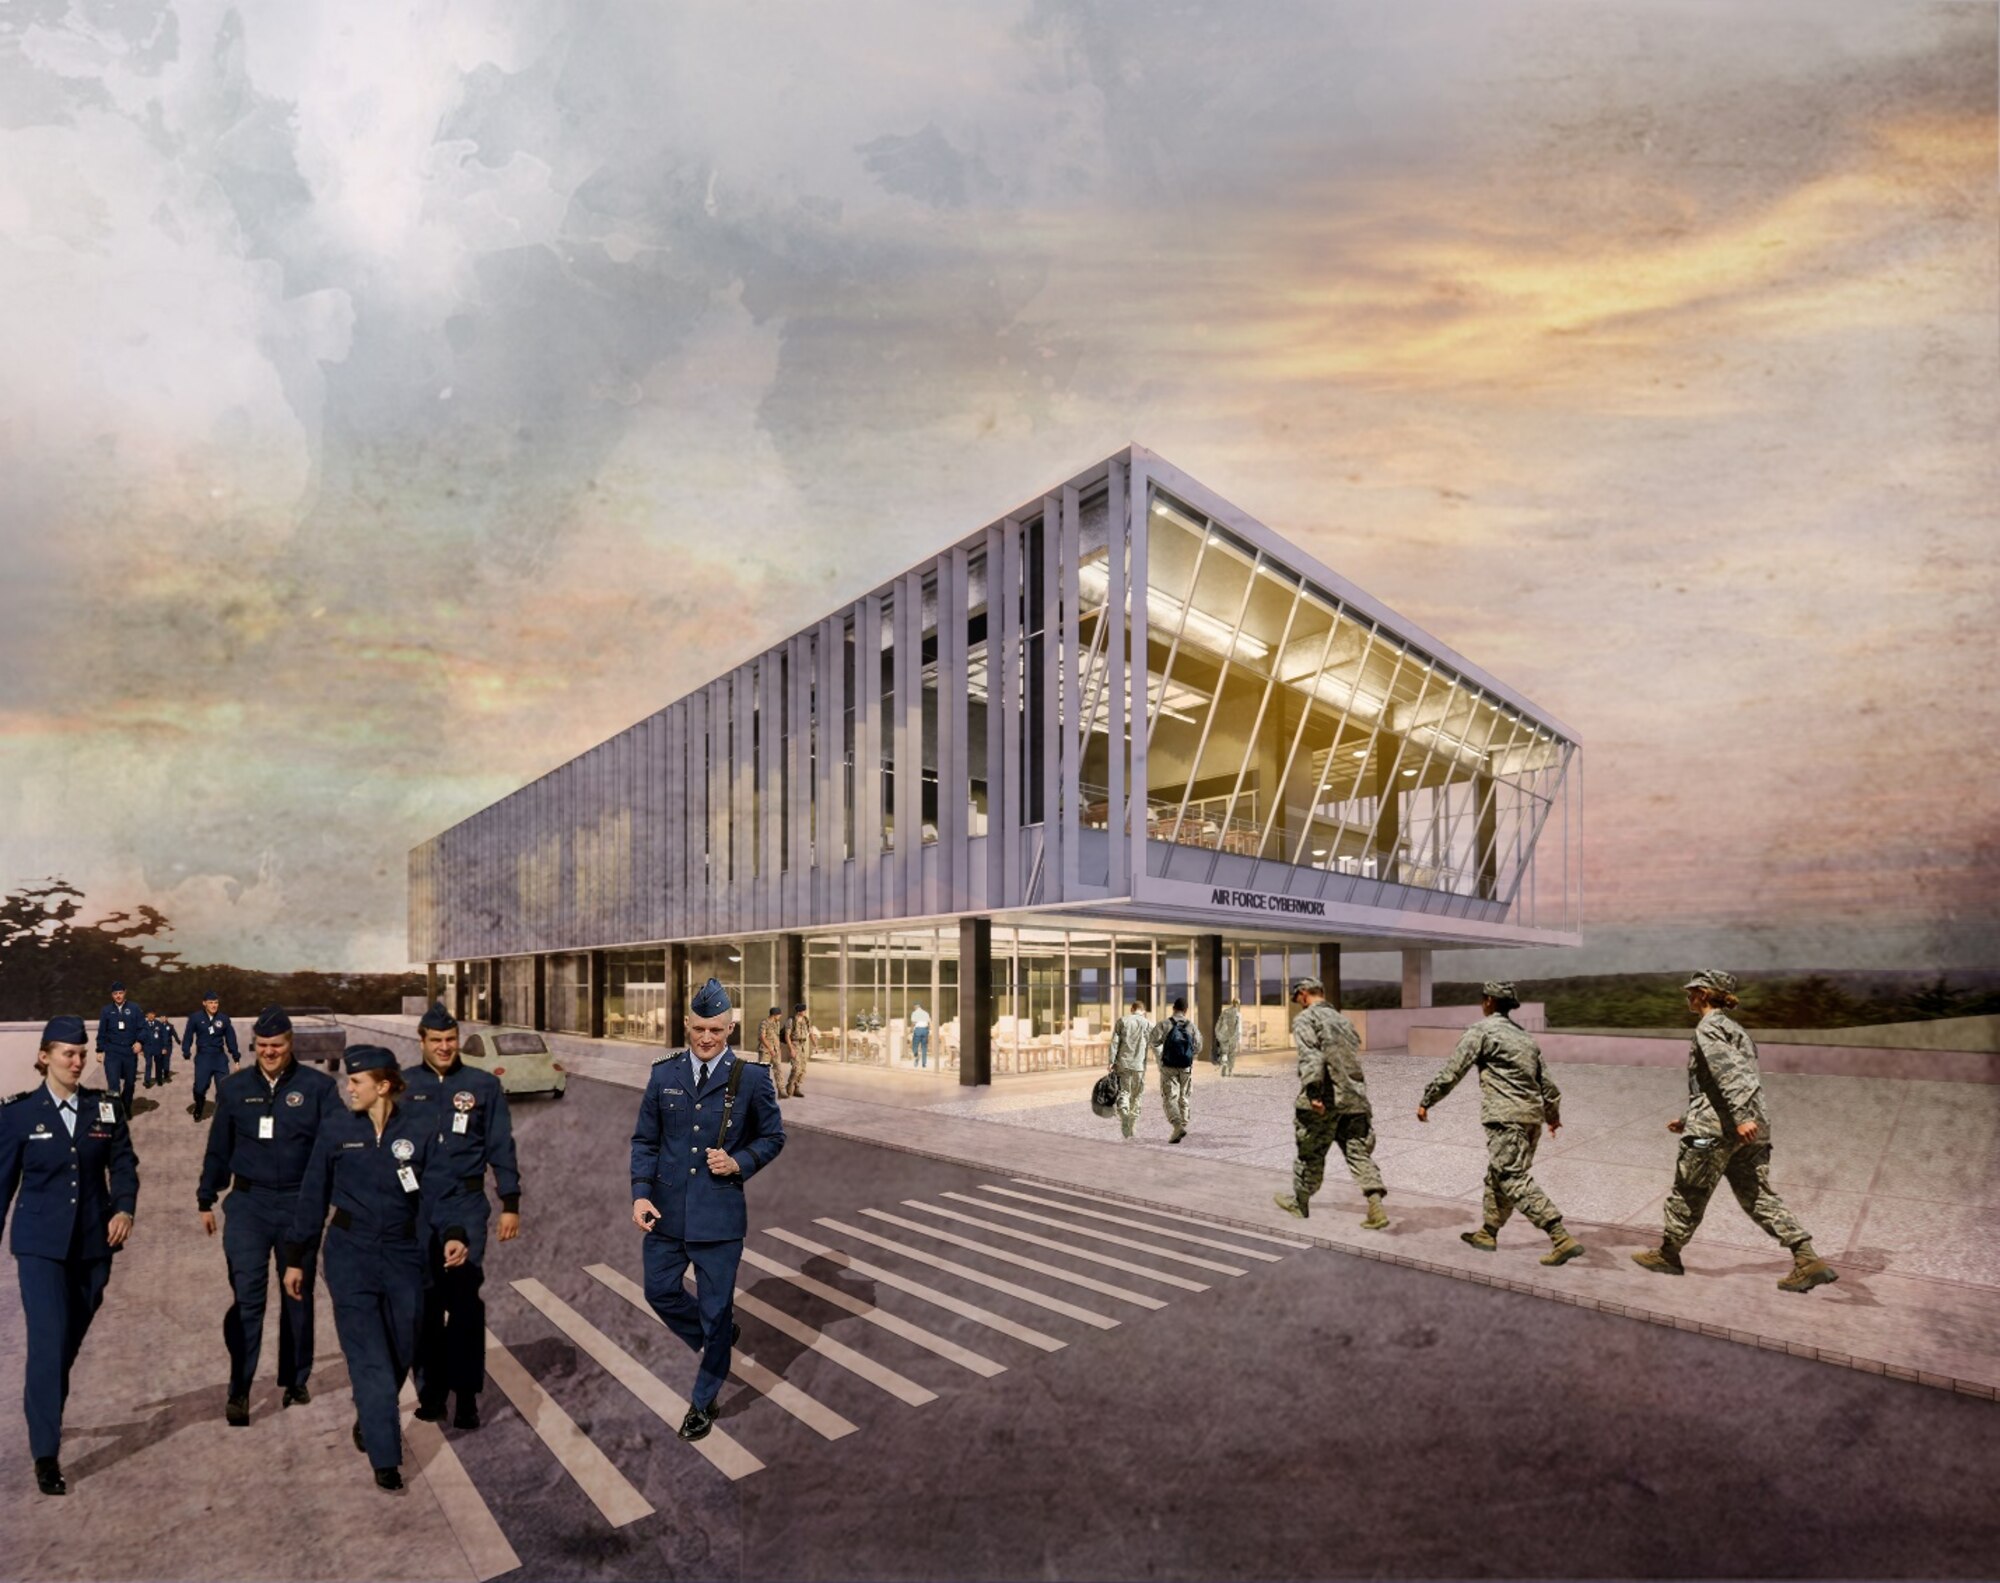 The Air Force Civil Engineer Center is designing and constructing a $30 Million, 33,000-square-foot facility at the U.S. Air Force Academy to train the next generation of cyber warriors.